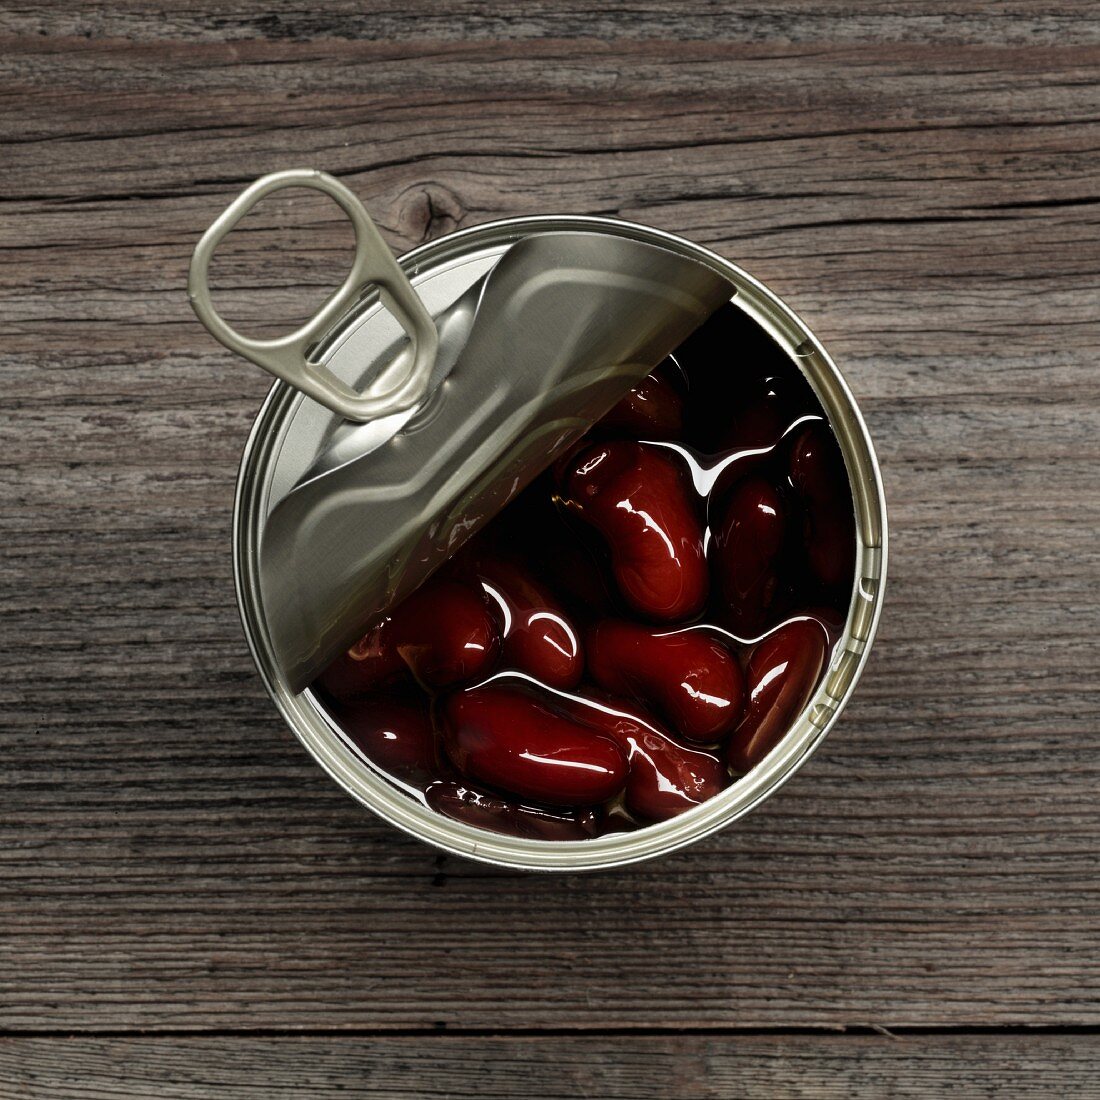 An opened tin of kidney beans